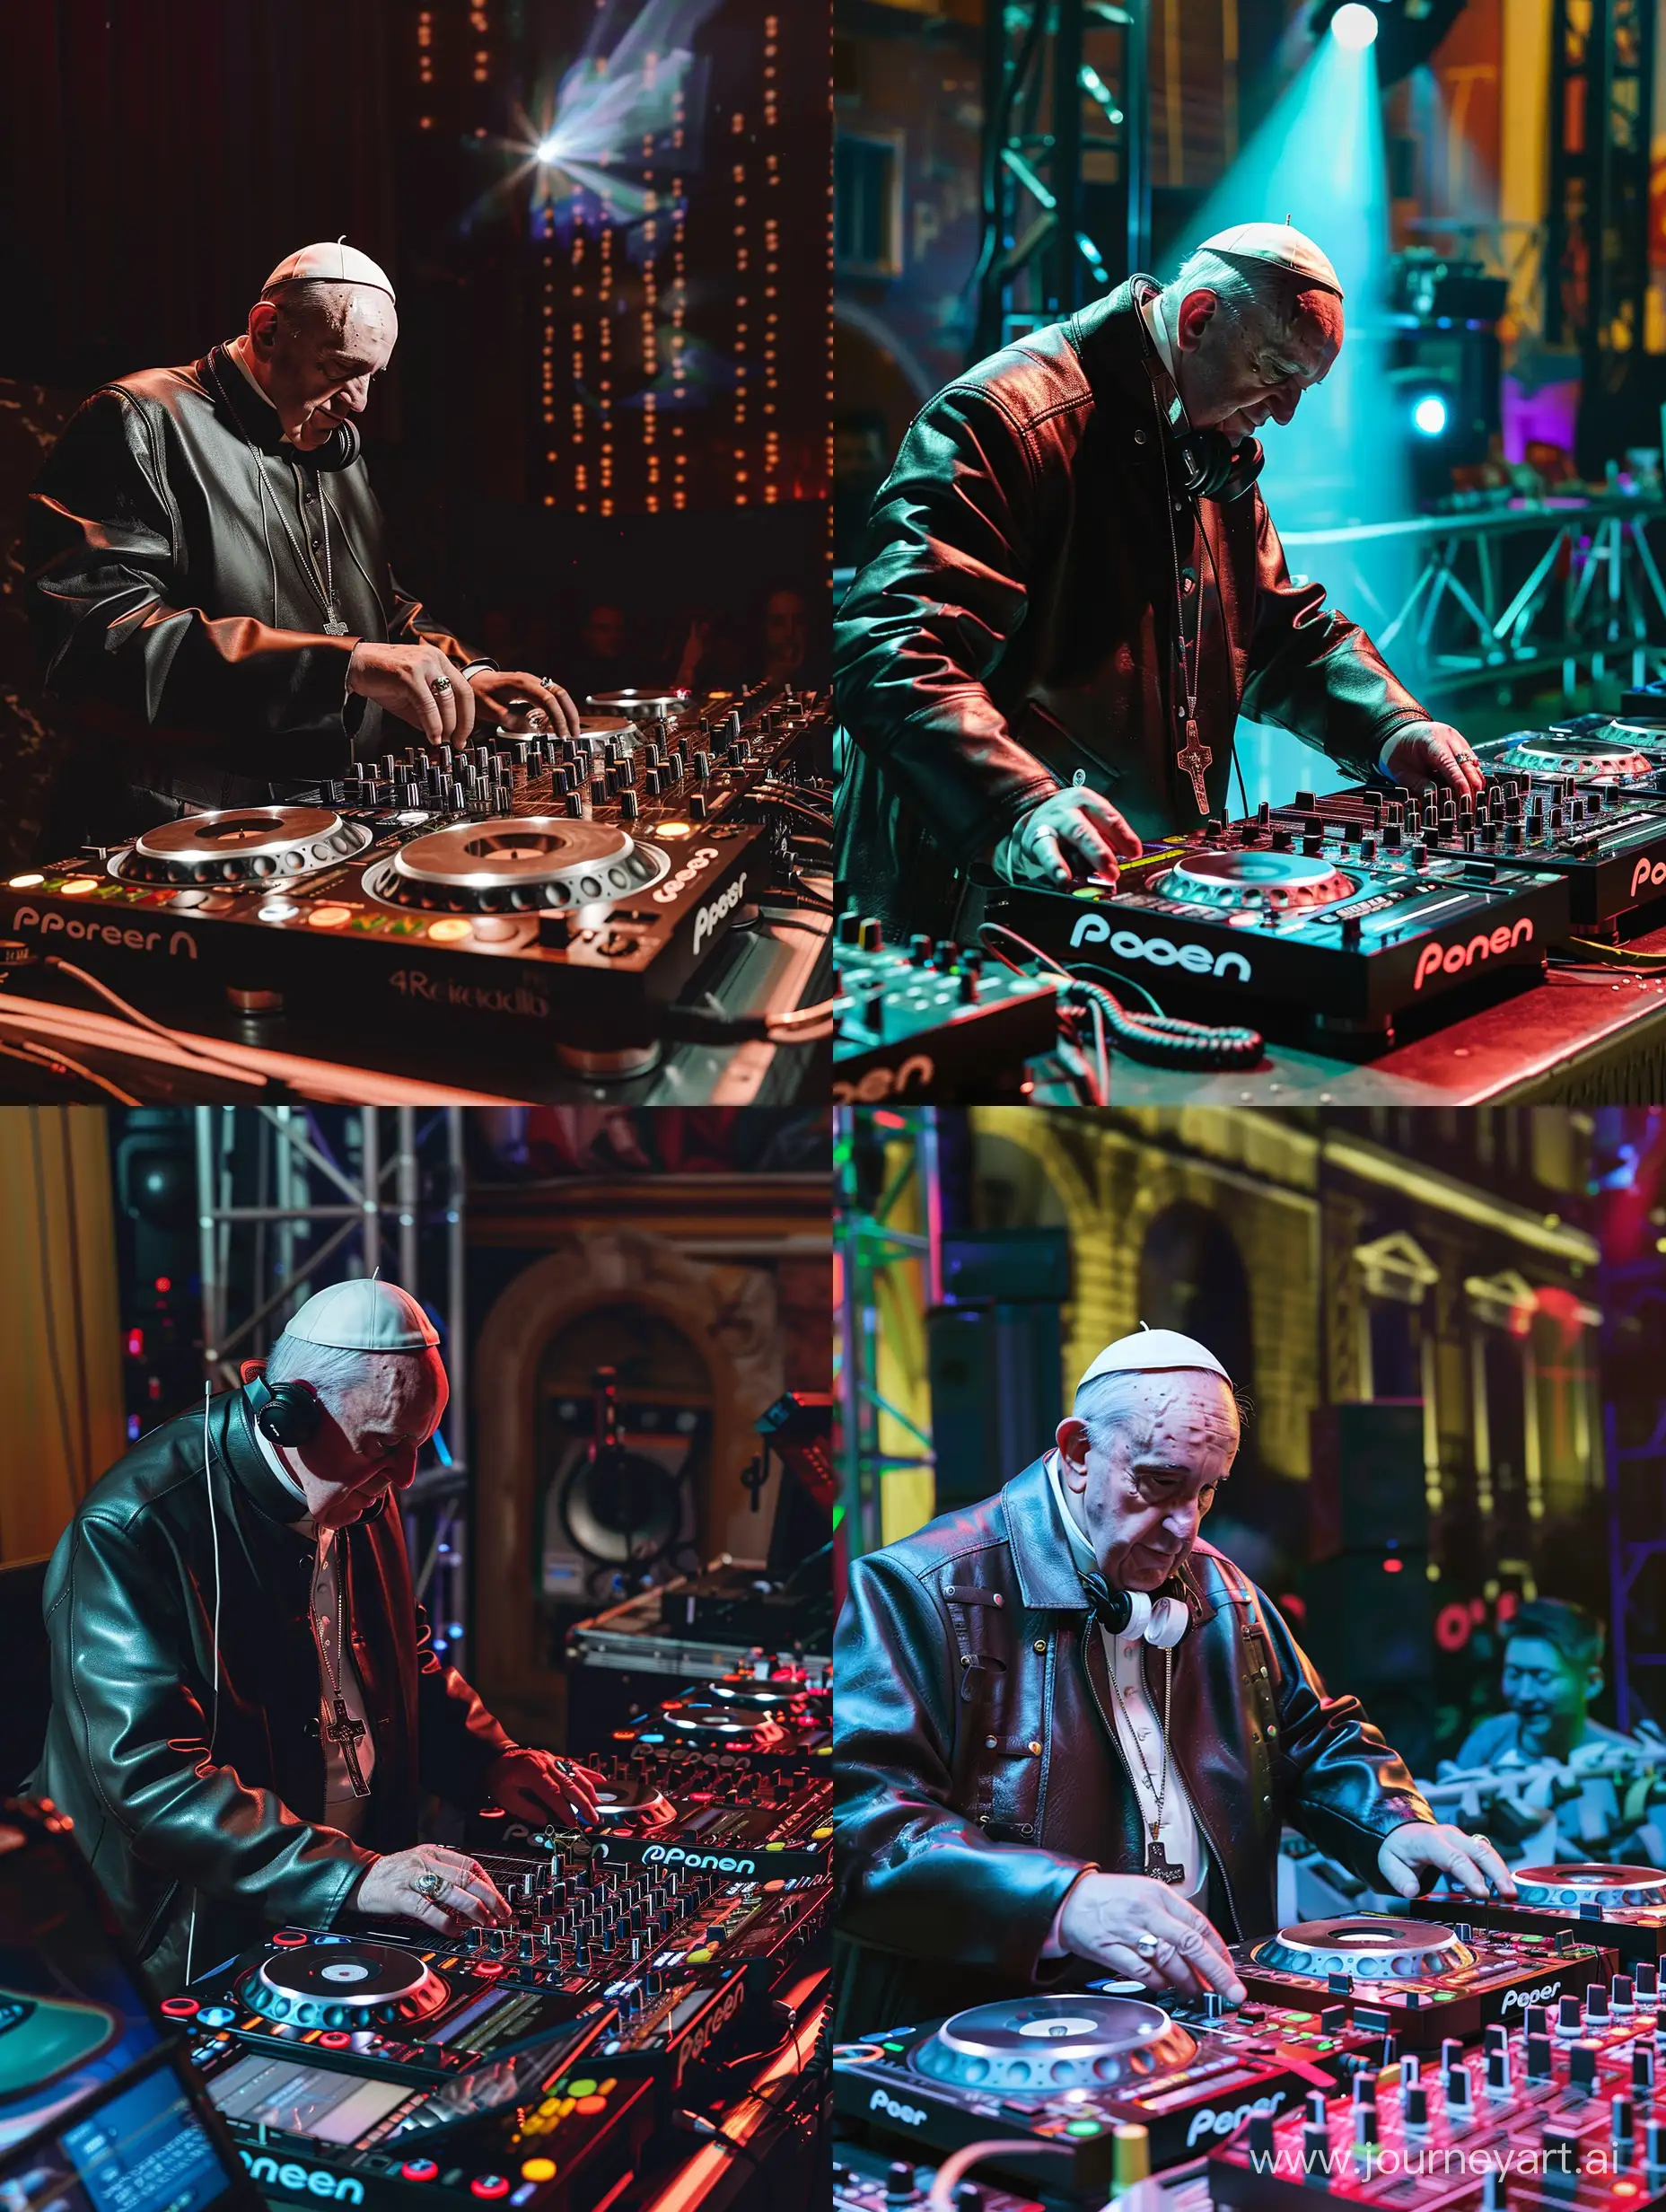 (Pope Francis) wearing leather jacket is a DJ in a nightclub, mixing live on stage, giant mixing table, 4k resolution, a masterpiece